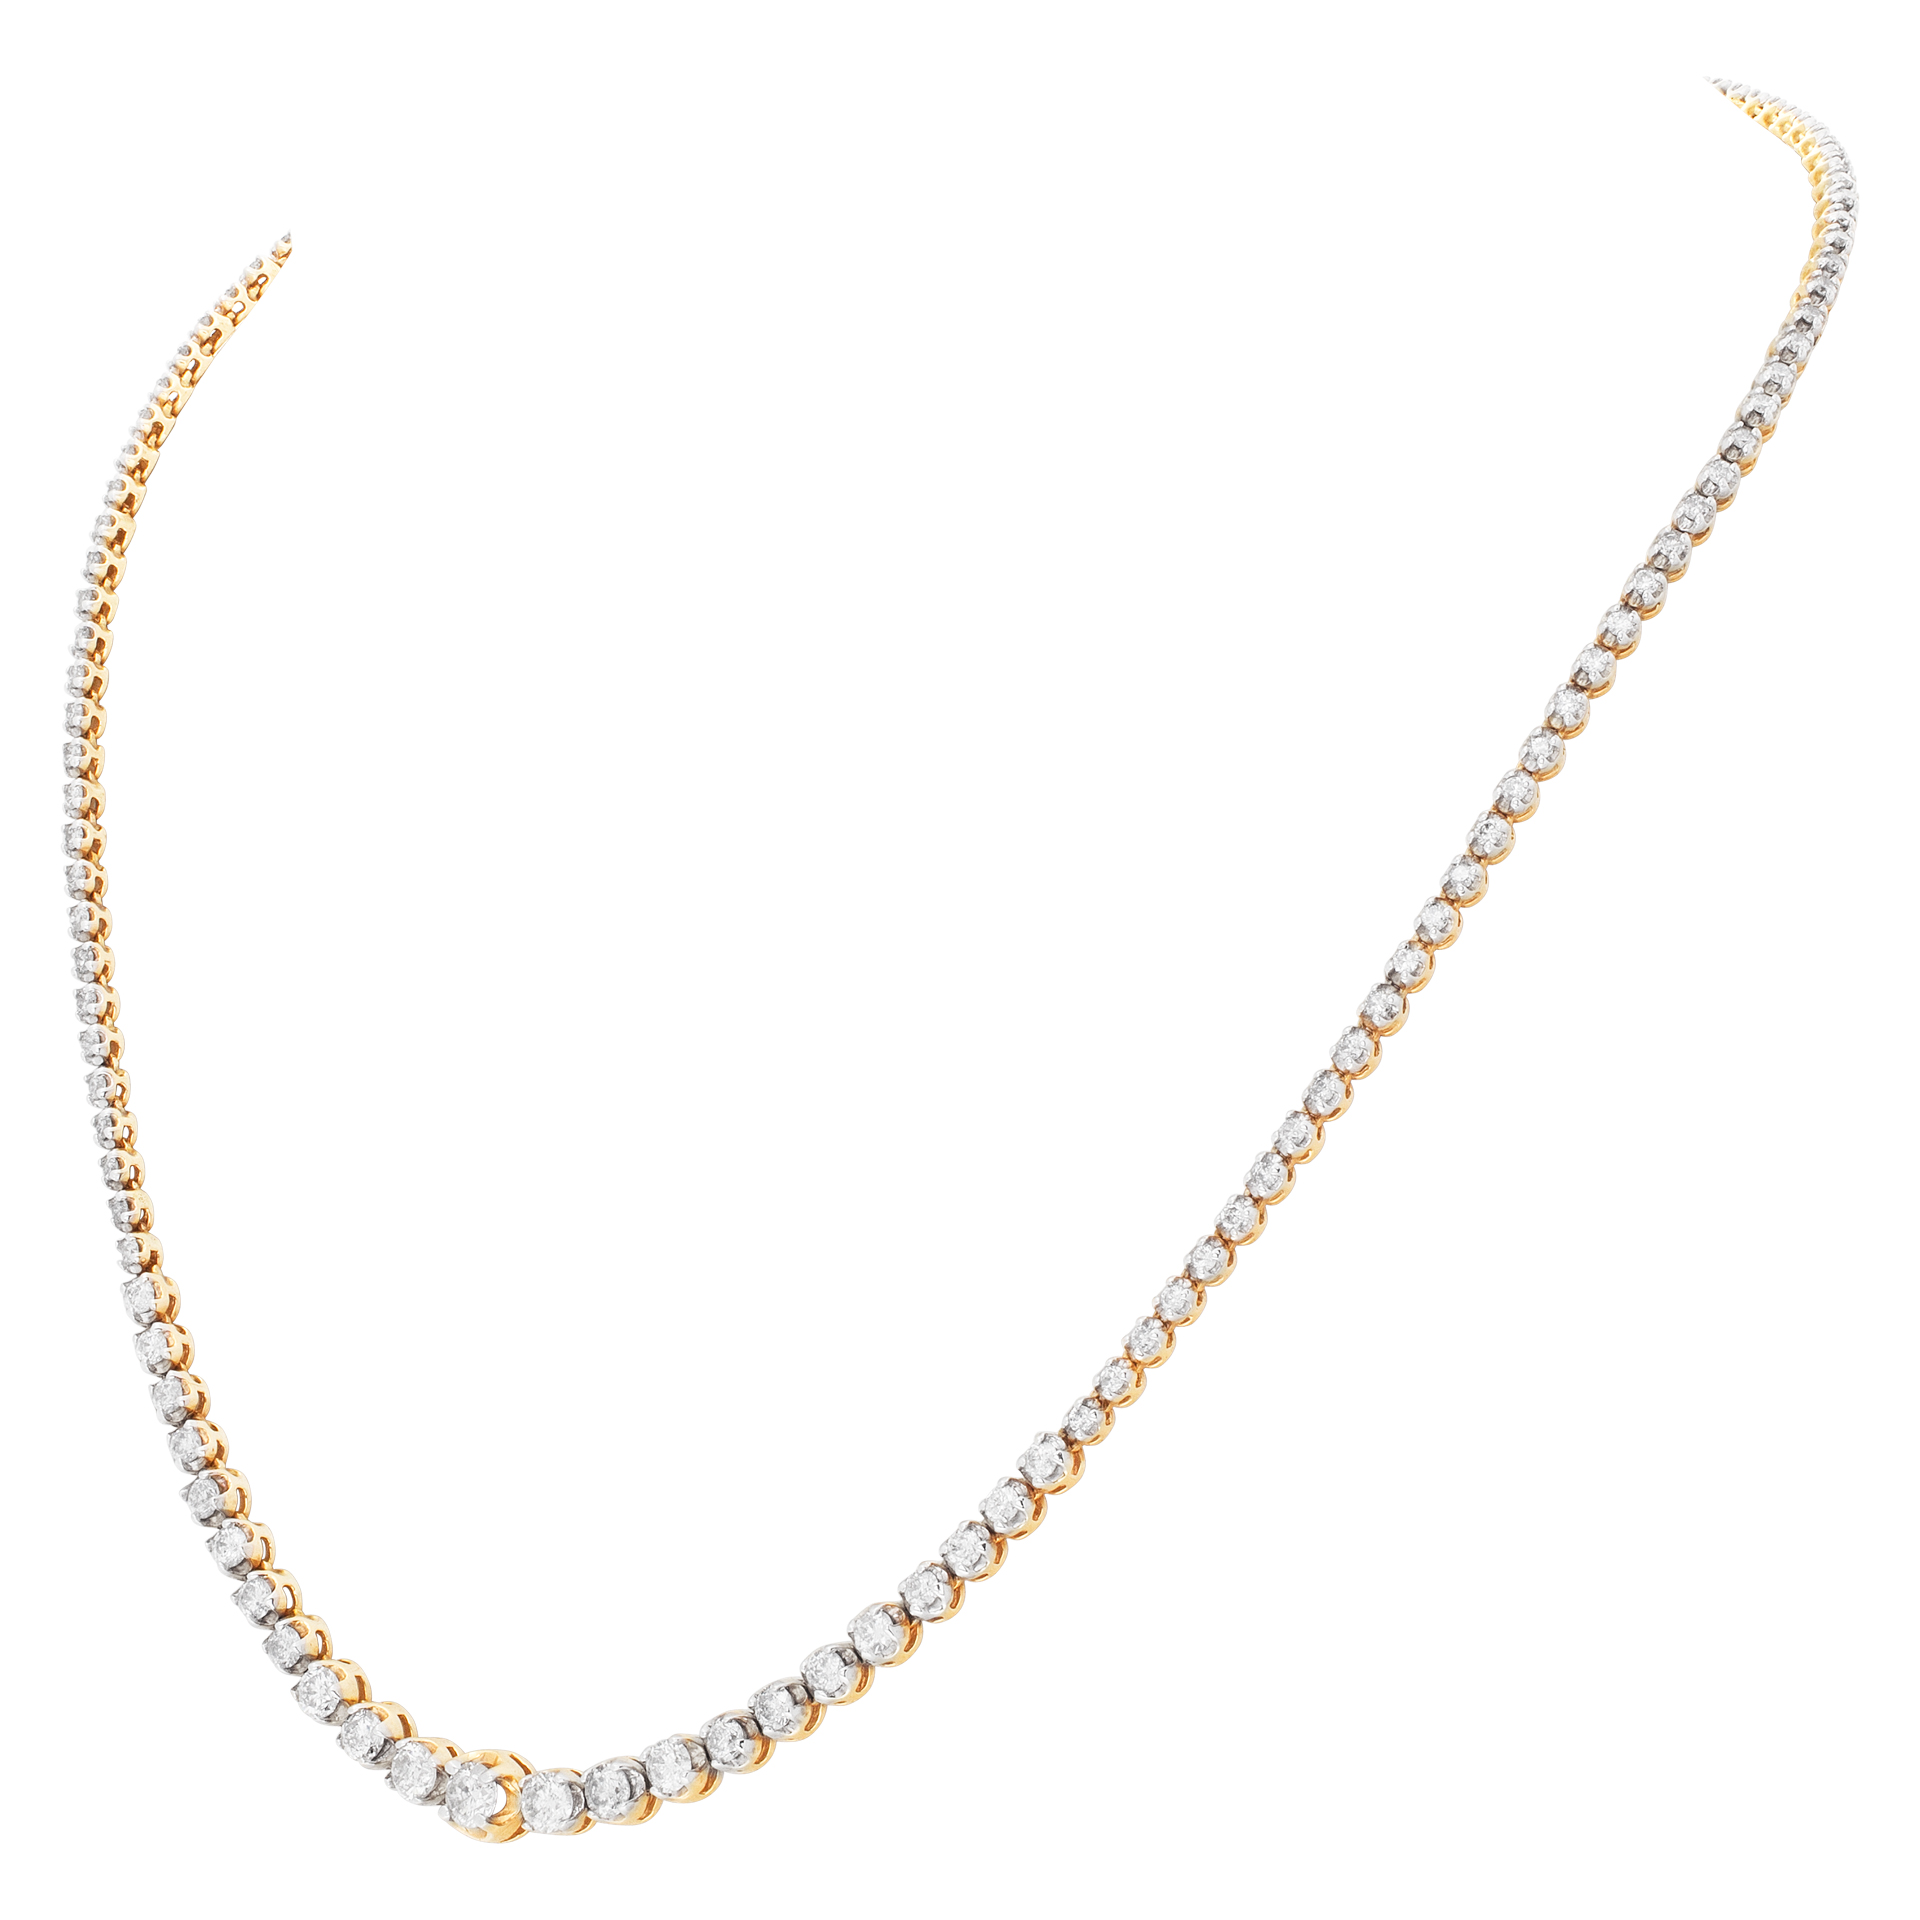 Diamond line necklace in 14k gold. 2.00 carats in diamonds image 3